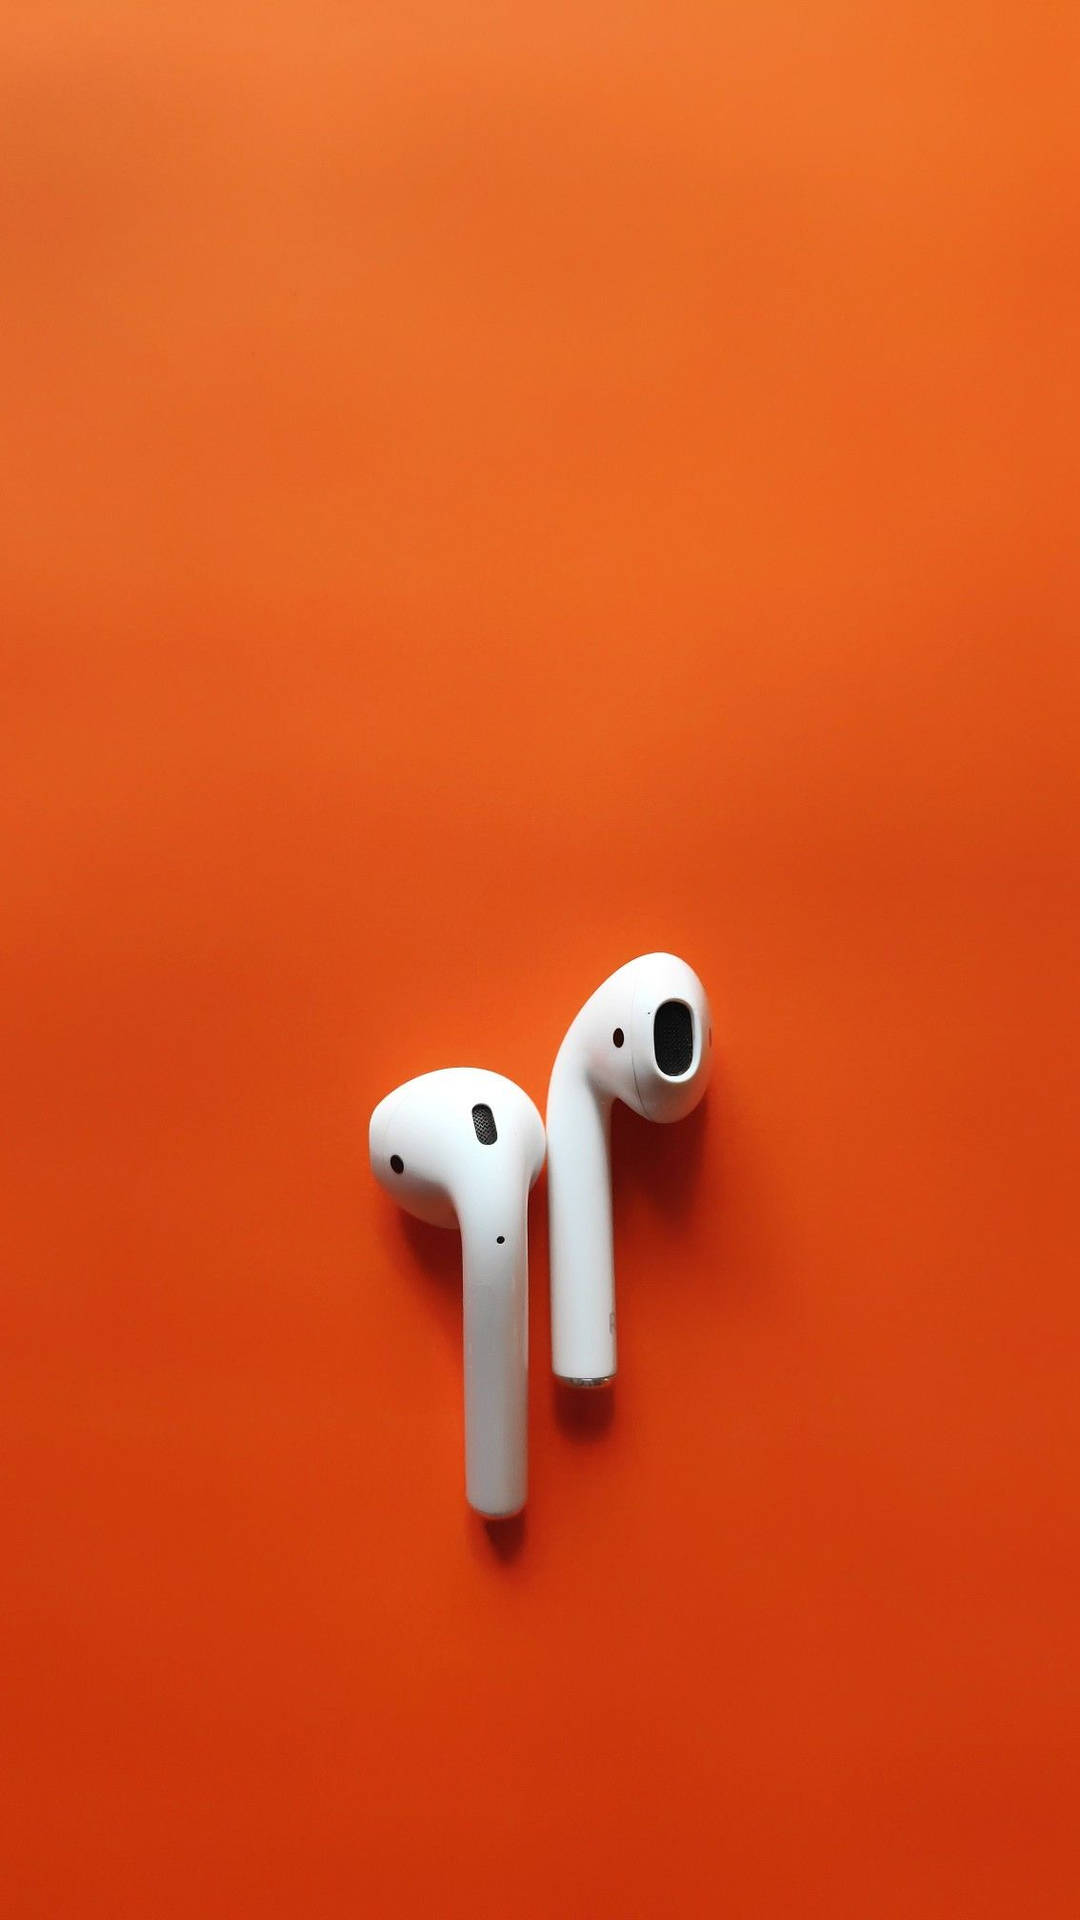 HD wallpaper AirPods on laptop iphone macbook iphone8 apple neon  refelction  Wallpaper Flare